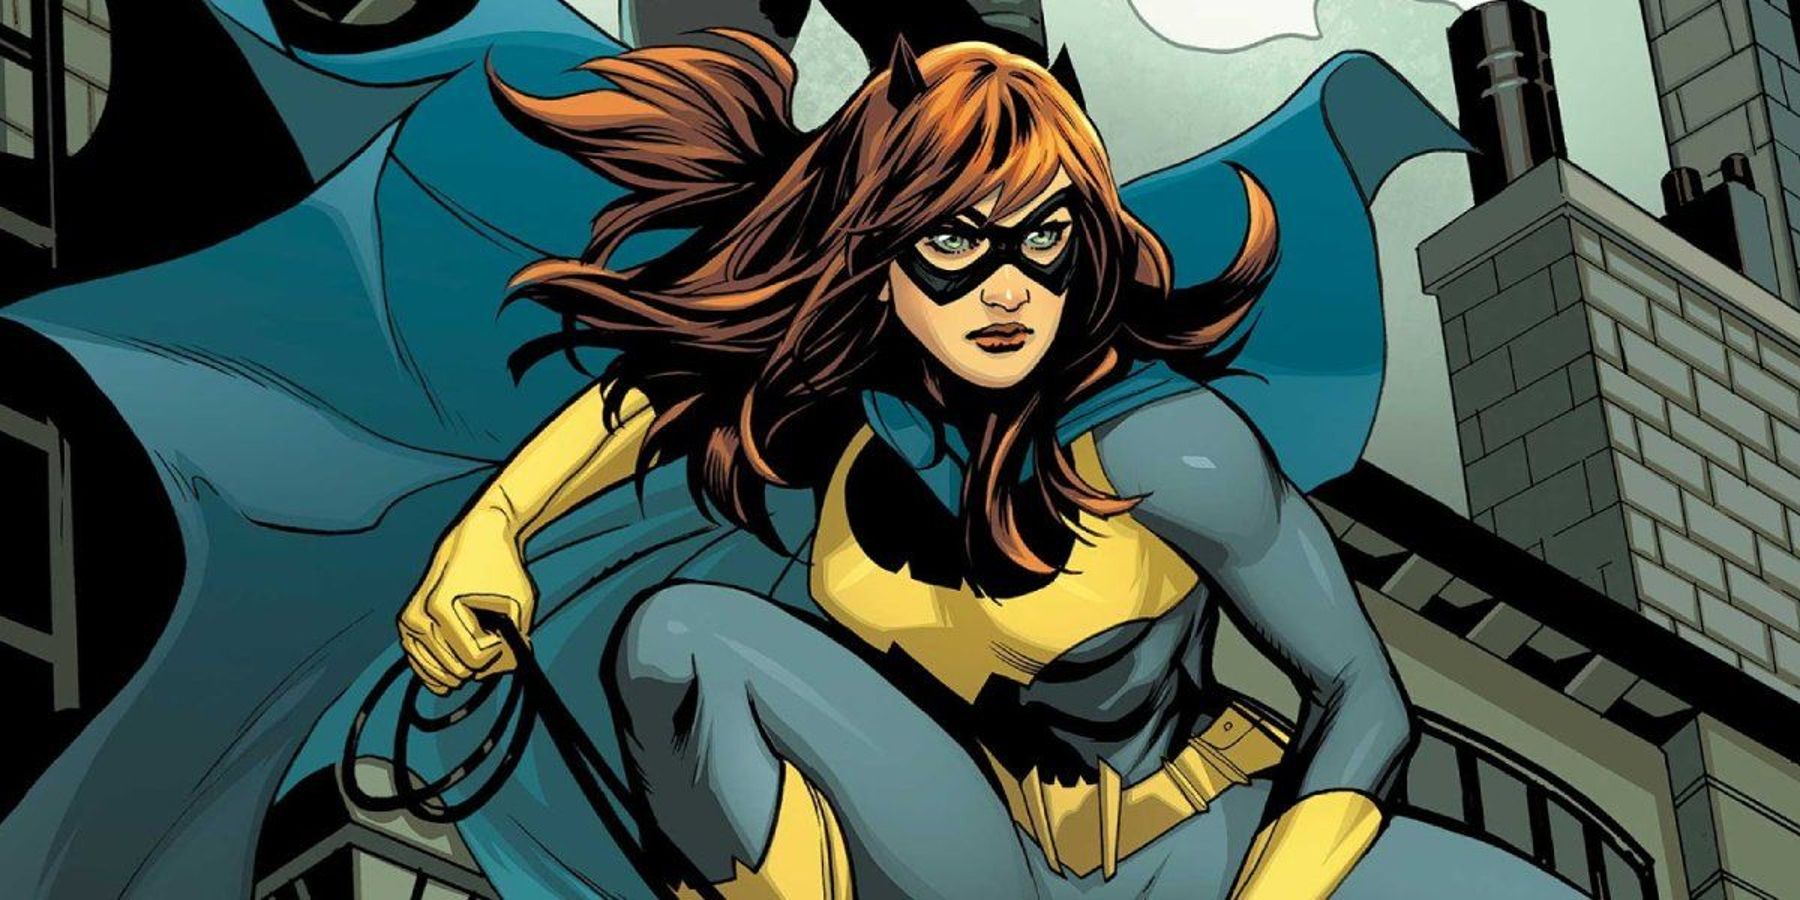 Batgirl in her Rebirth design perched on a rooftop in DC comics